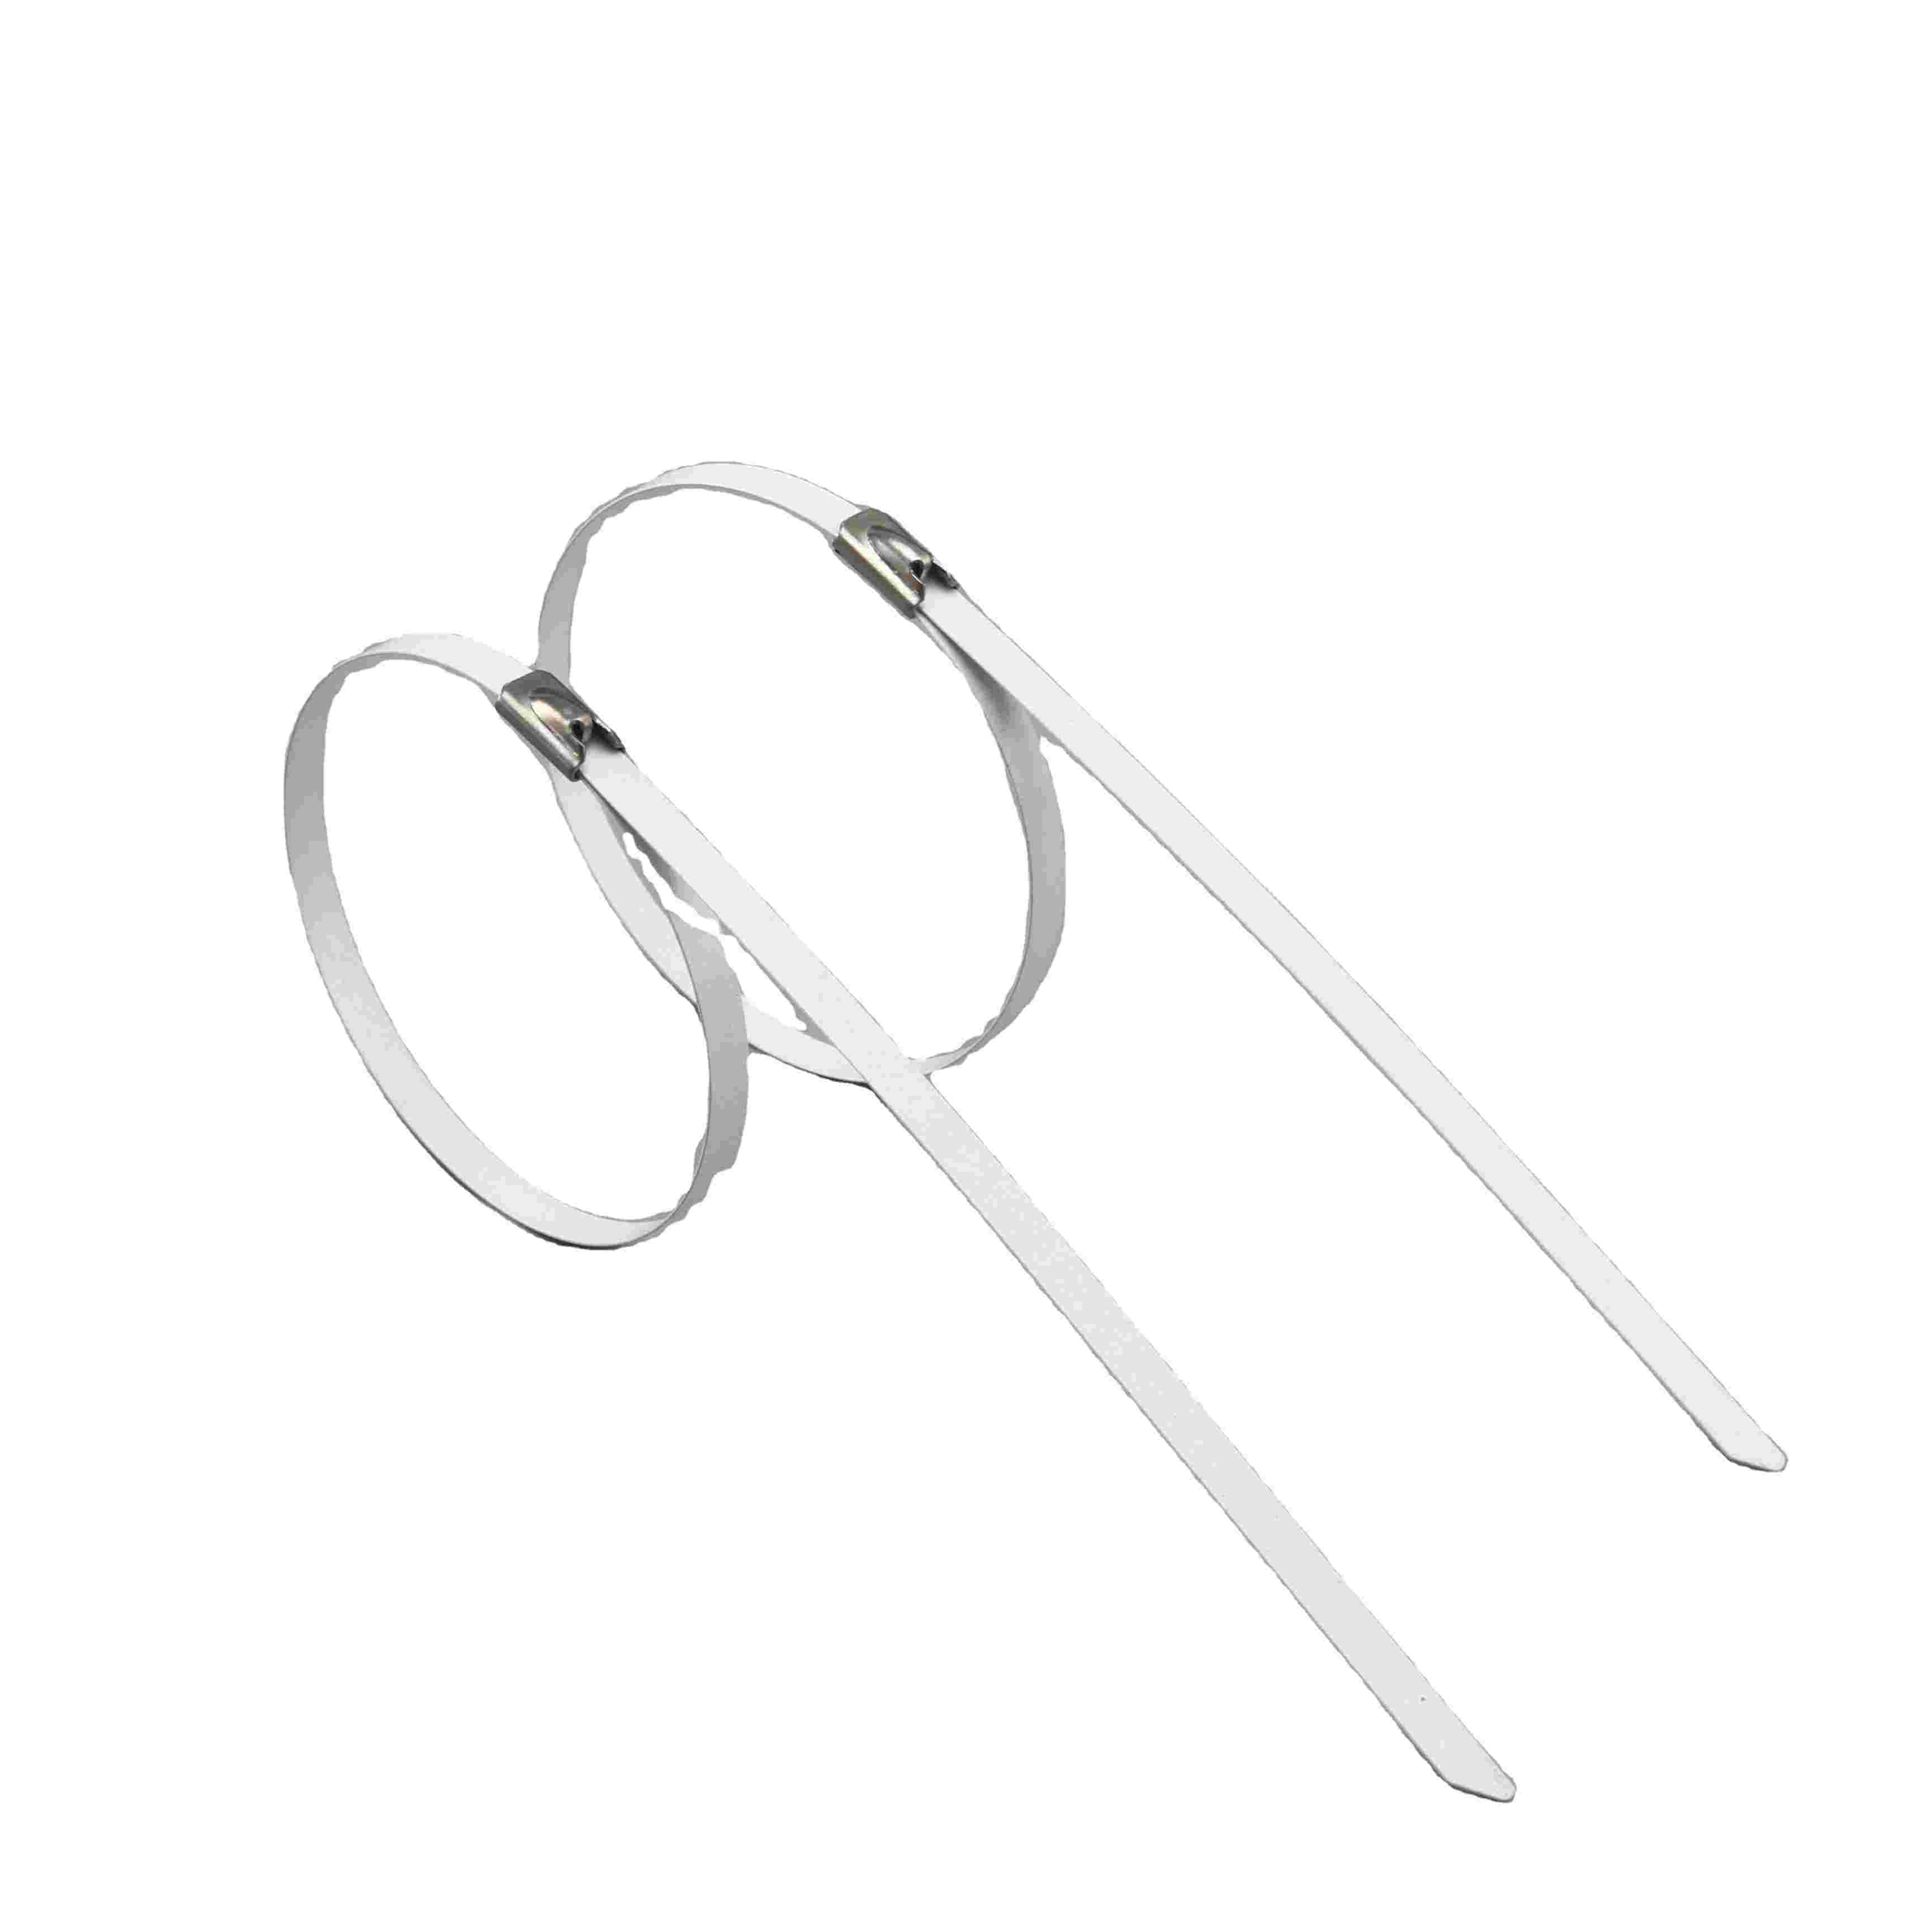 Stainless Steel Buckle Cable Ties - 3 